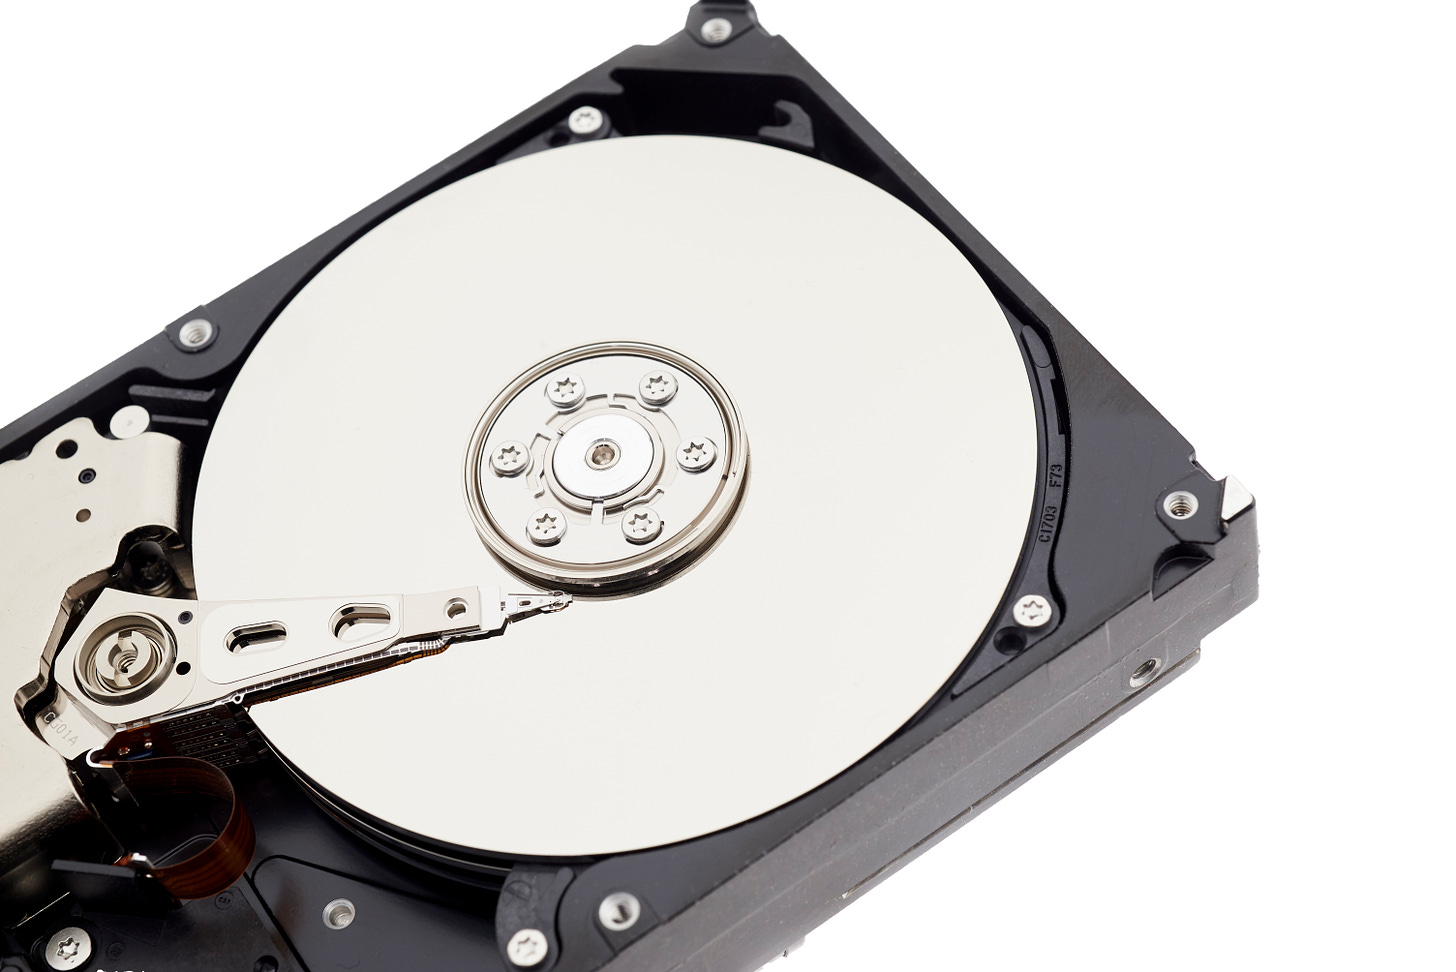 Hard disk drive without cover